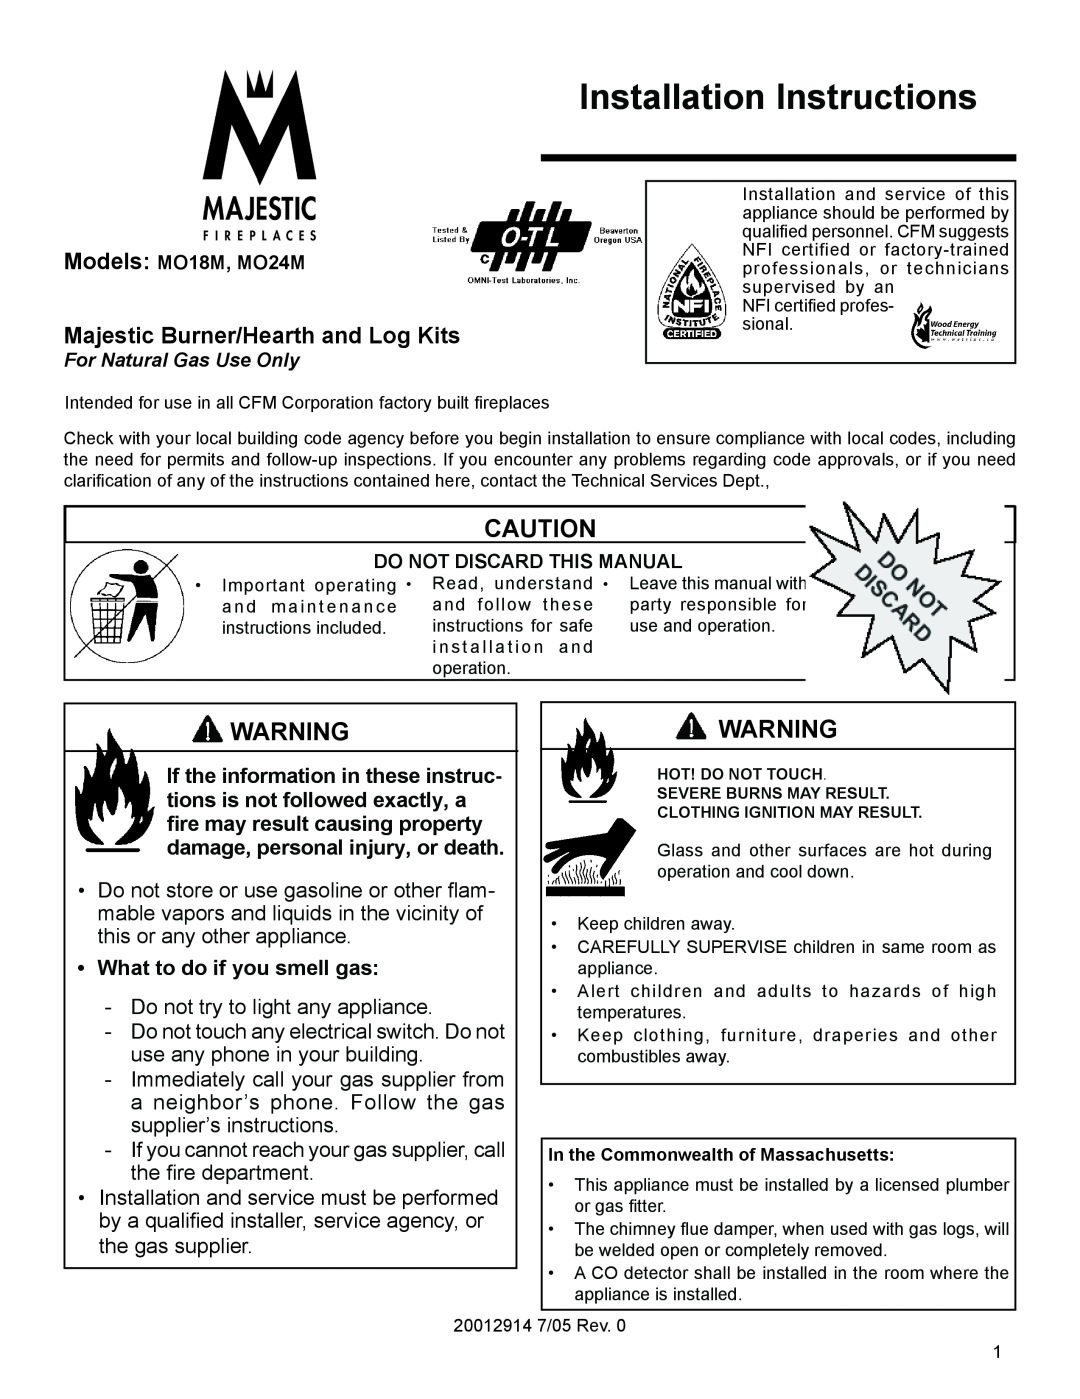 Vermont Casting MO18 installation instructions What to do if you smell gas, Installation Instructions 